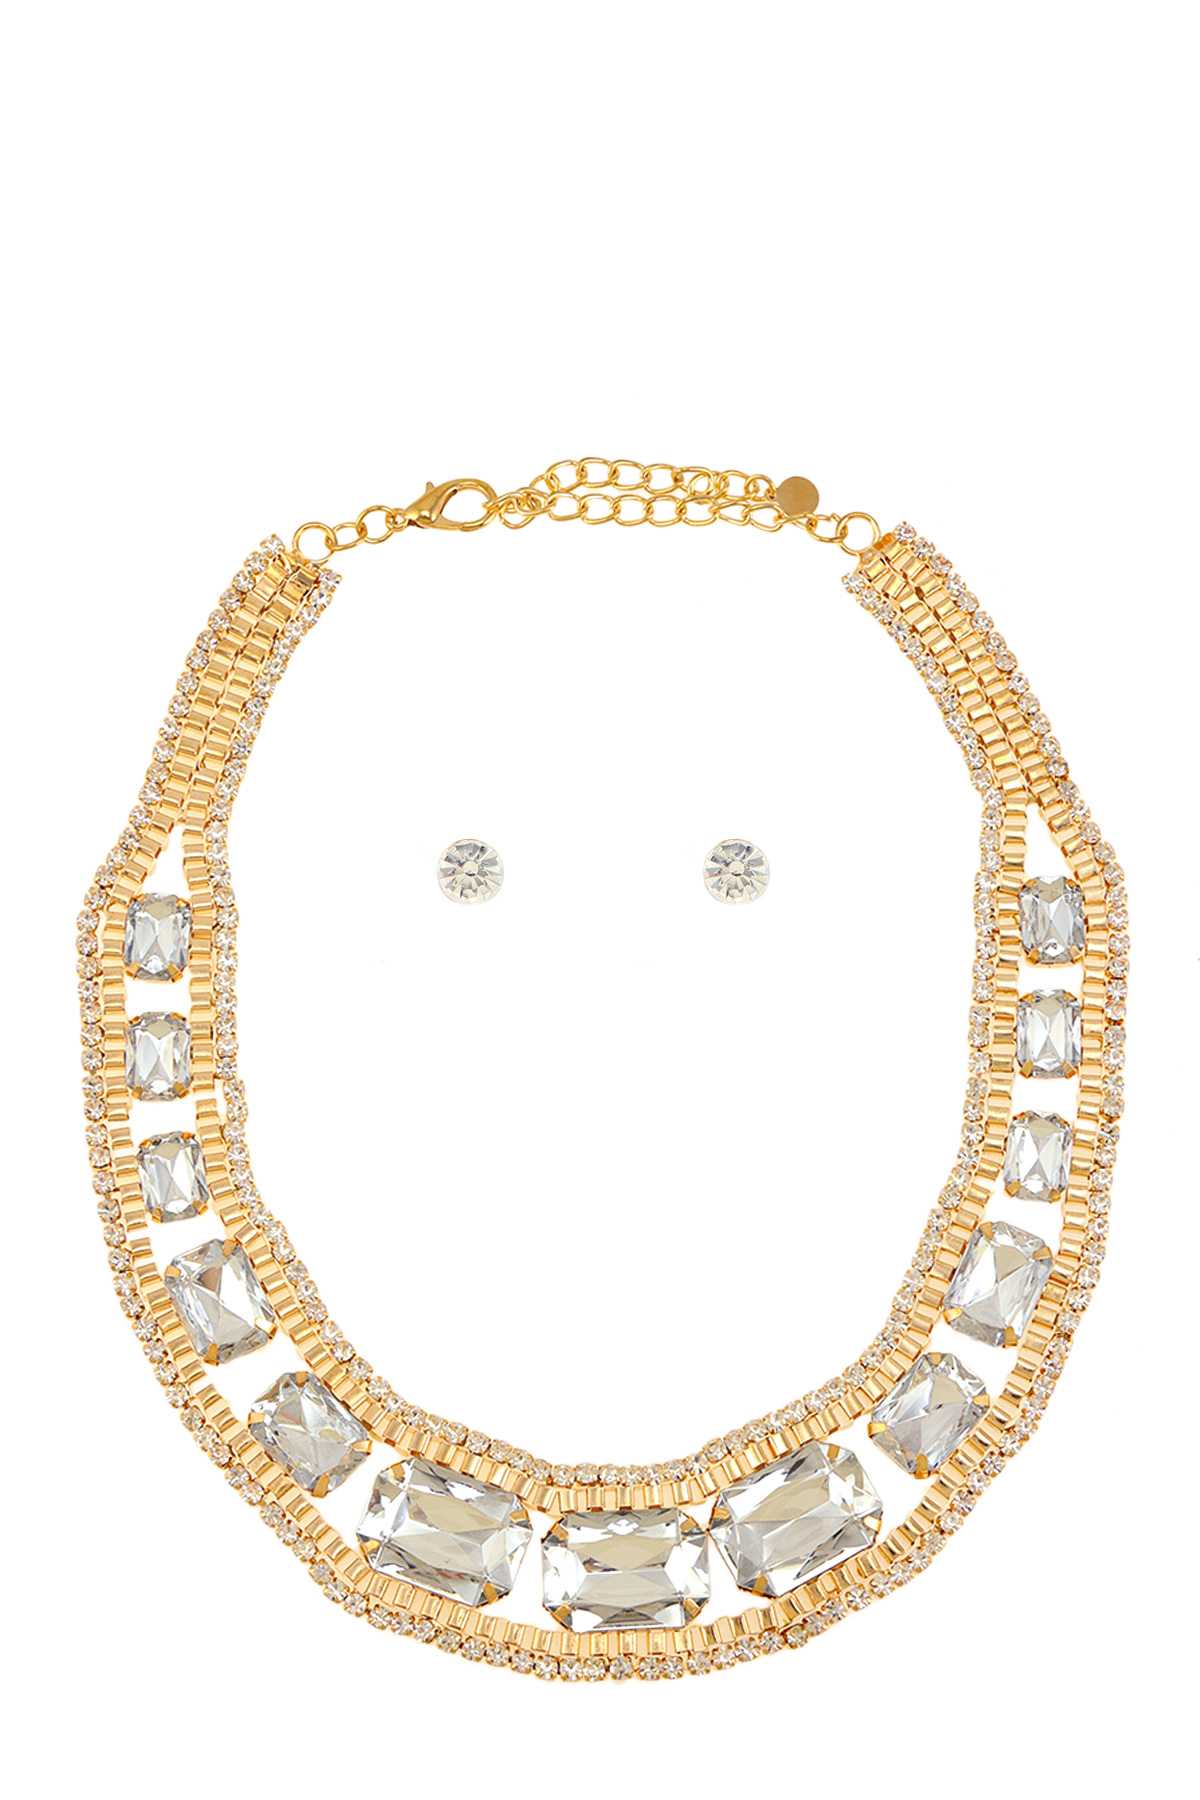 Rhinestone and Square Crystal Necklace Set